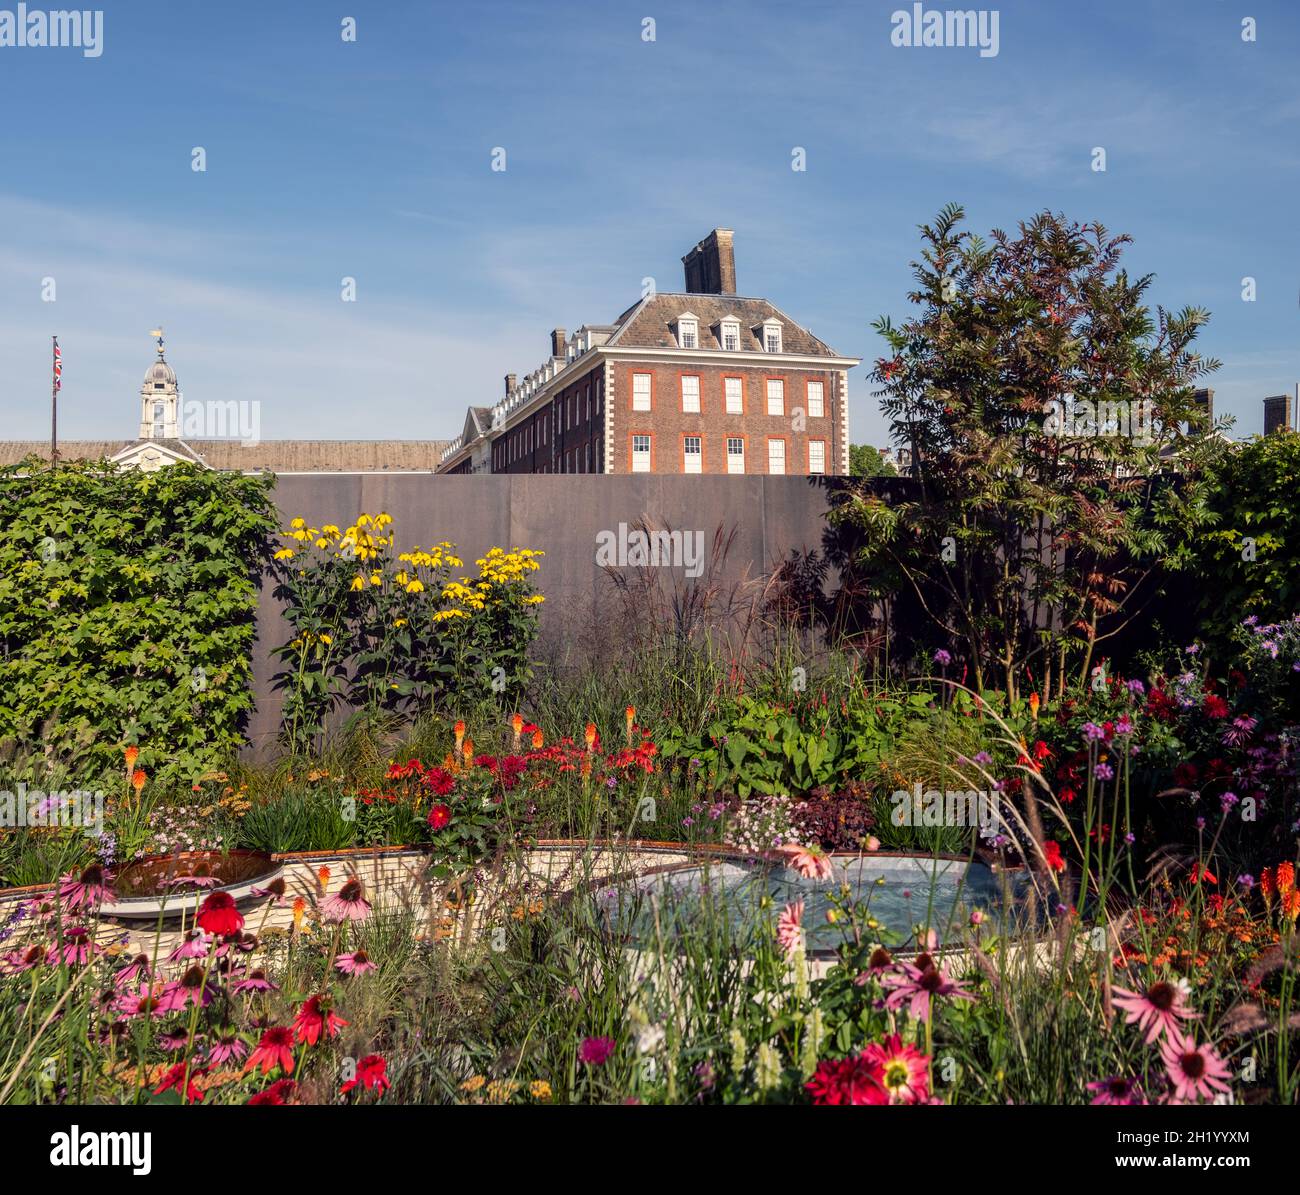 The NHS tribute garden at the Chelsea Flower Show 2021 in London, UK. Stock Photo